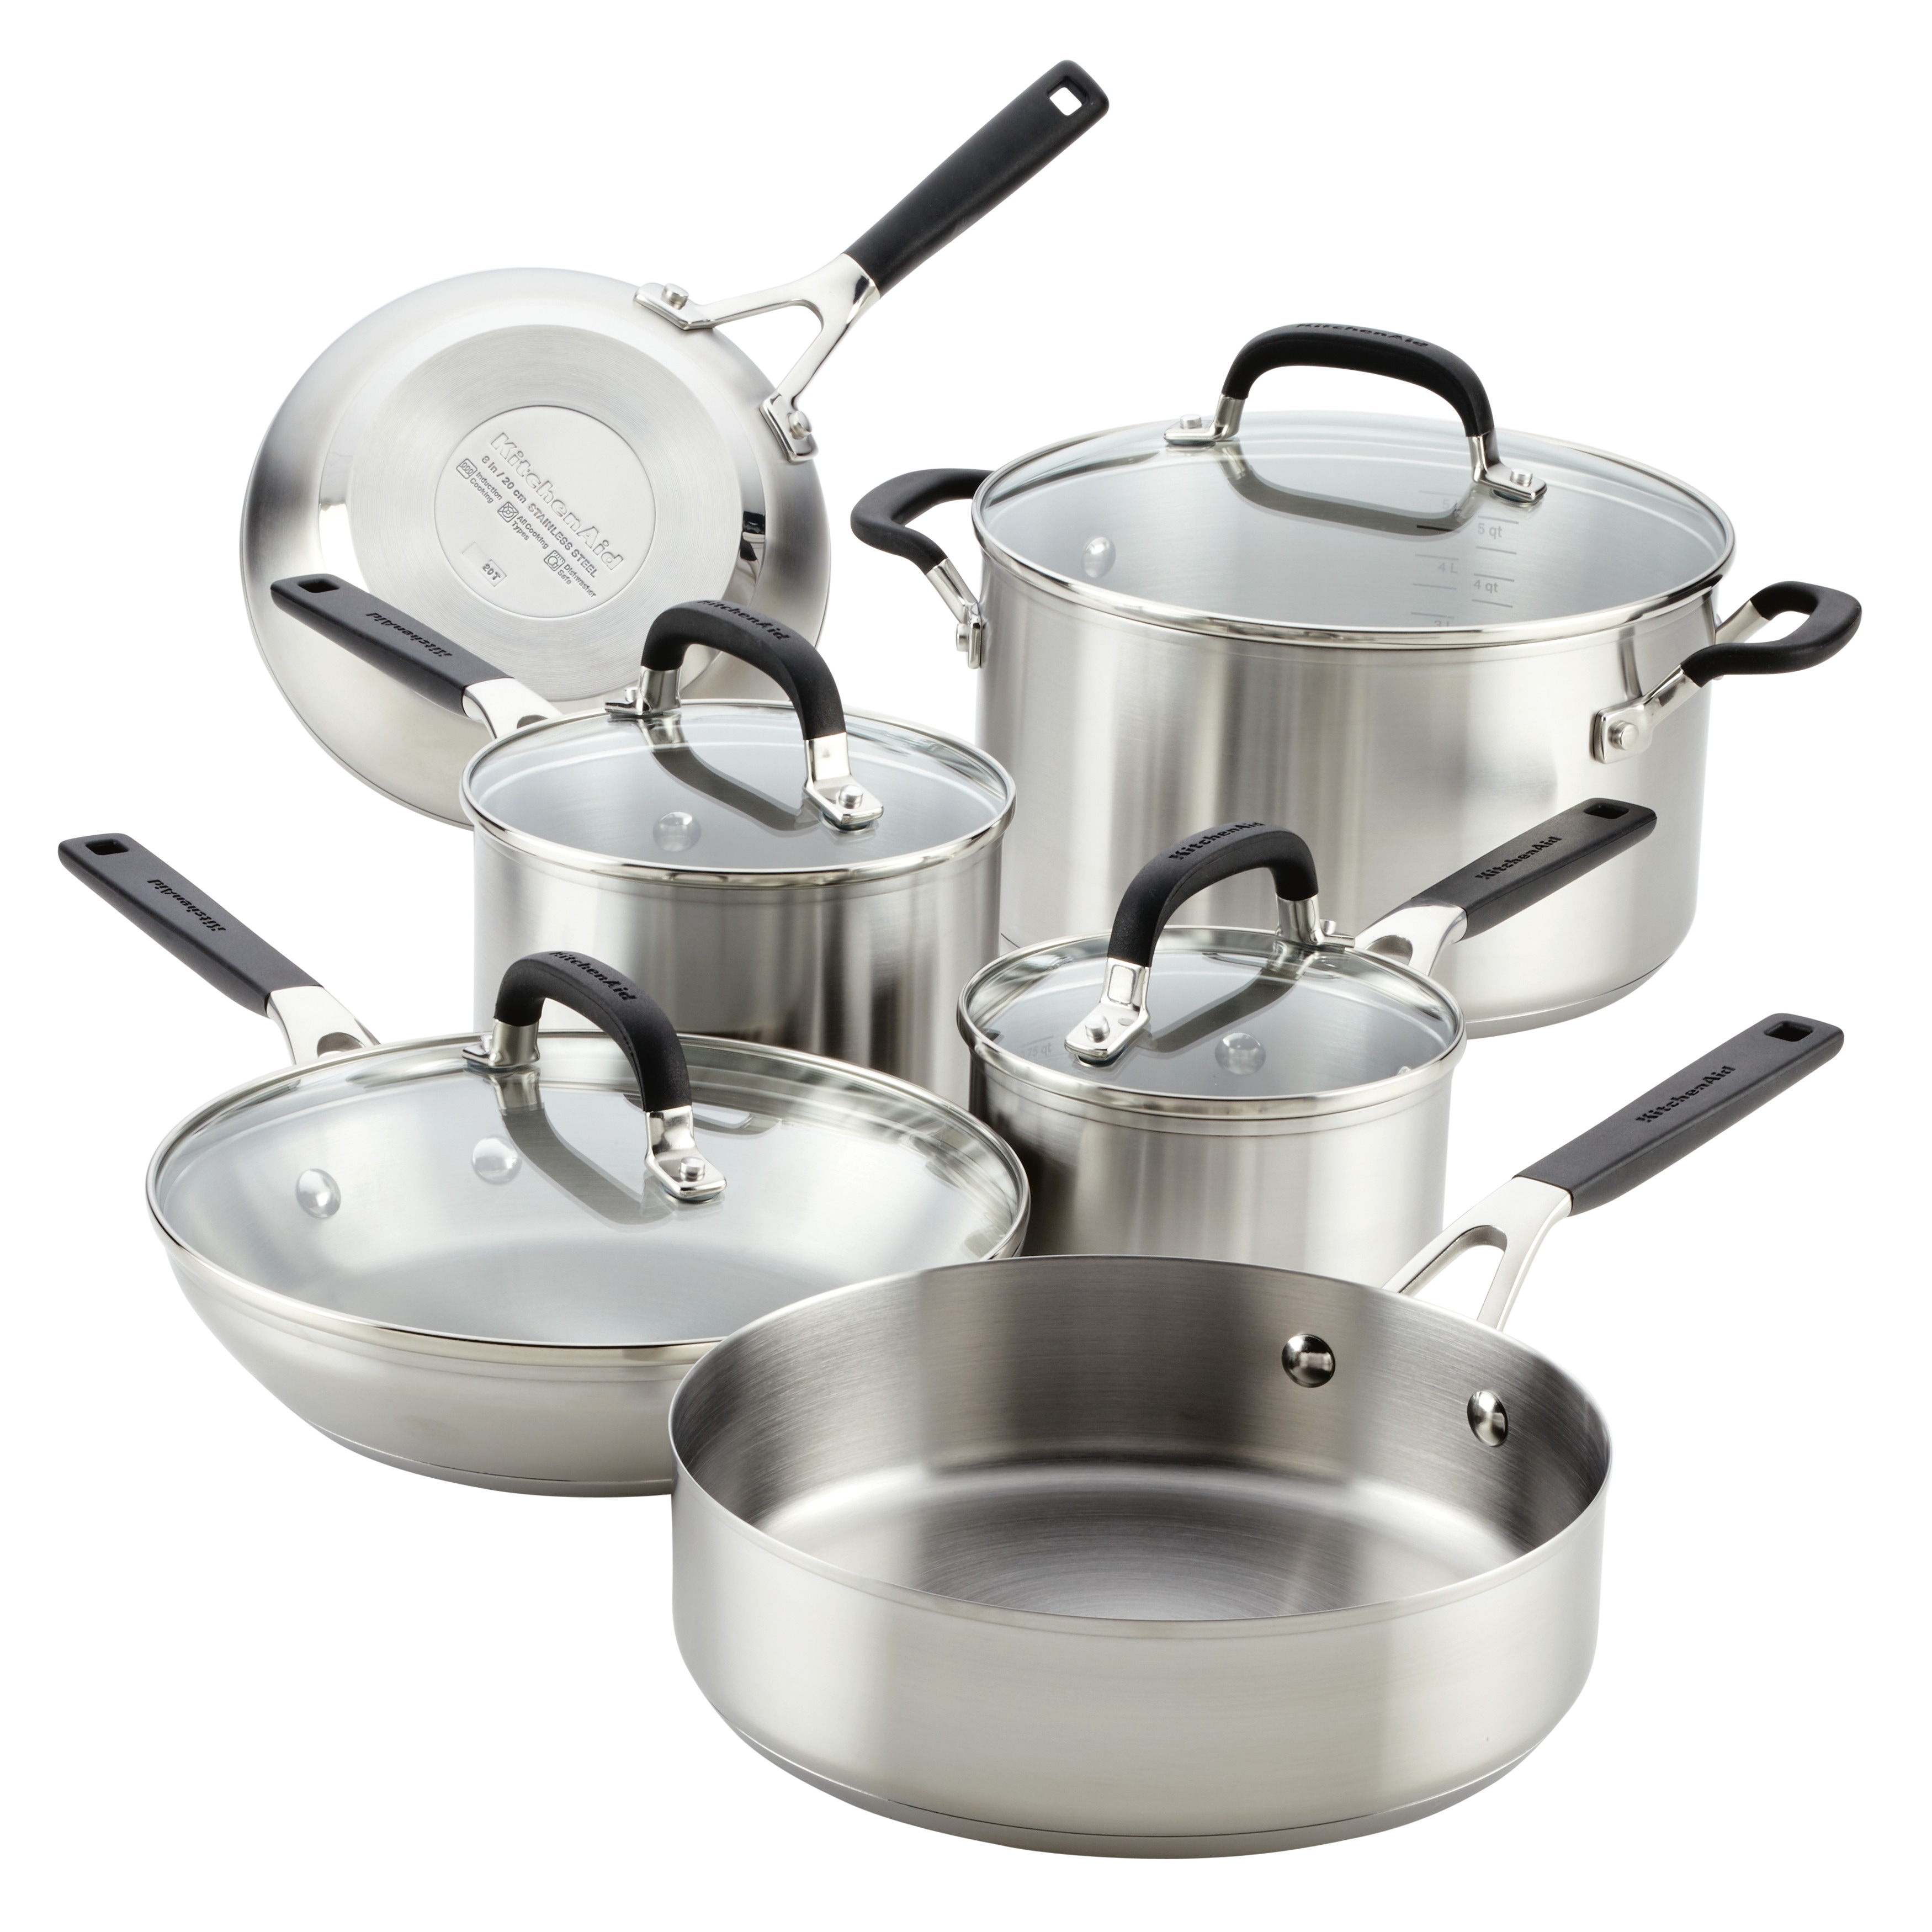 Anolon Tri-Ply Stainless Steel Cookware Set - Bed Bath & Beyond